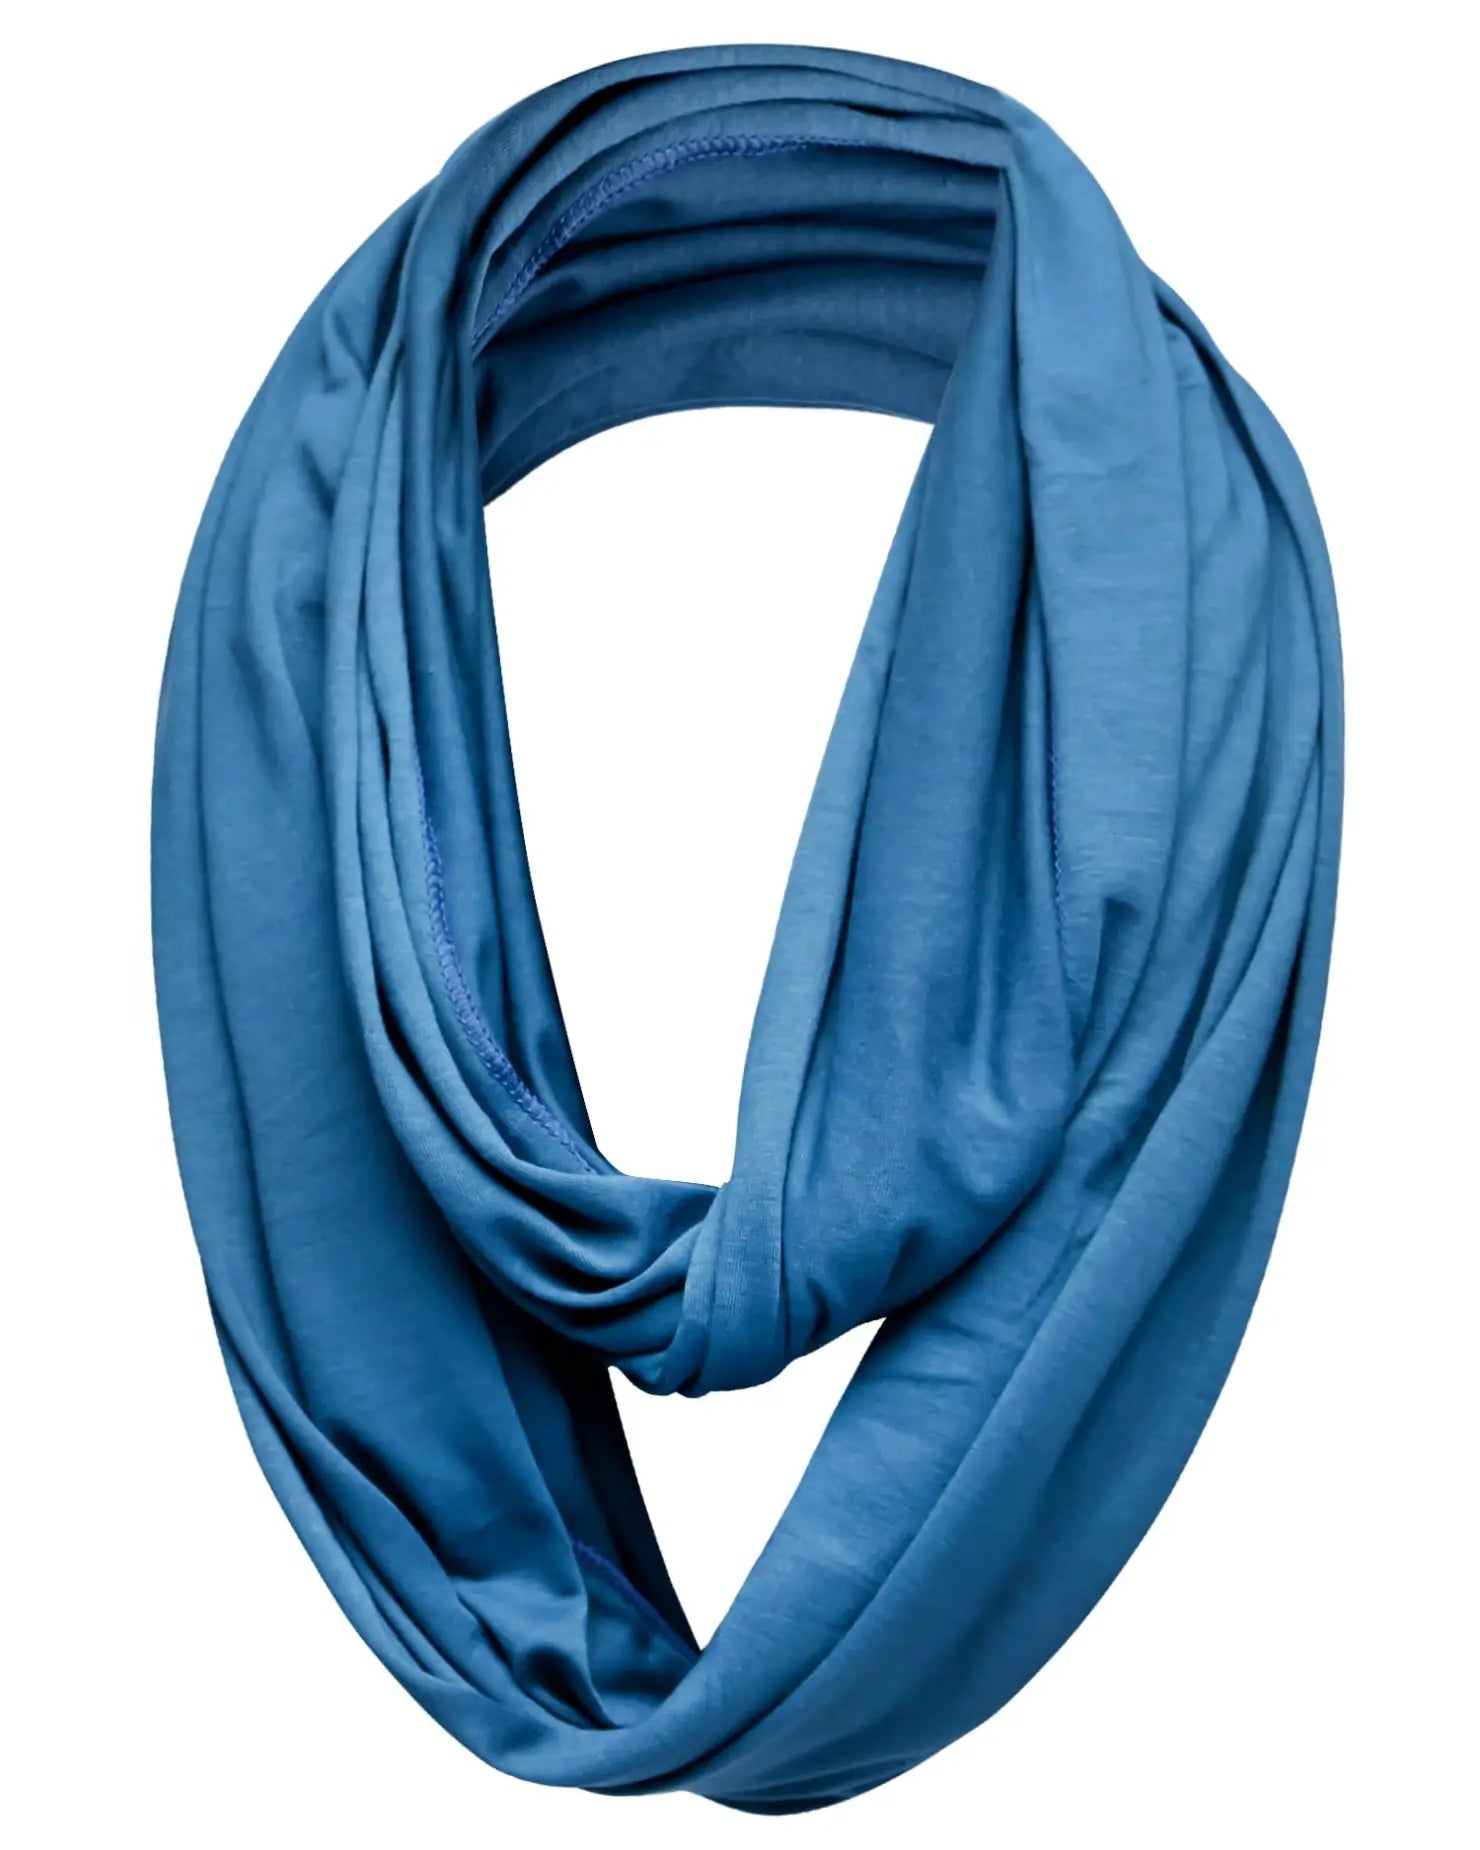 Cotton Blend Jersey Winter Snood: Blue Scarf on White Background